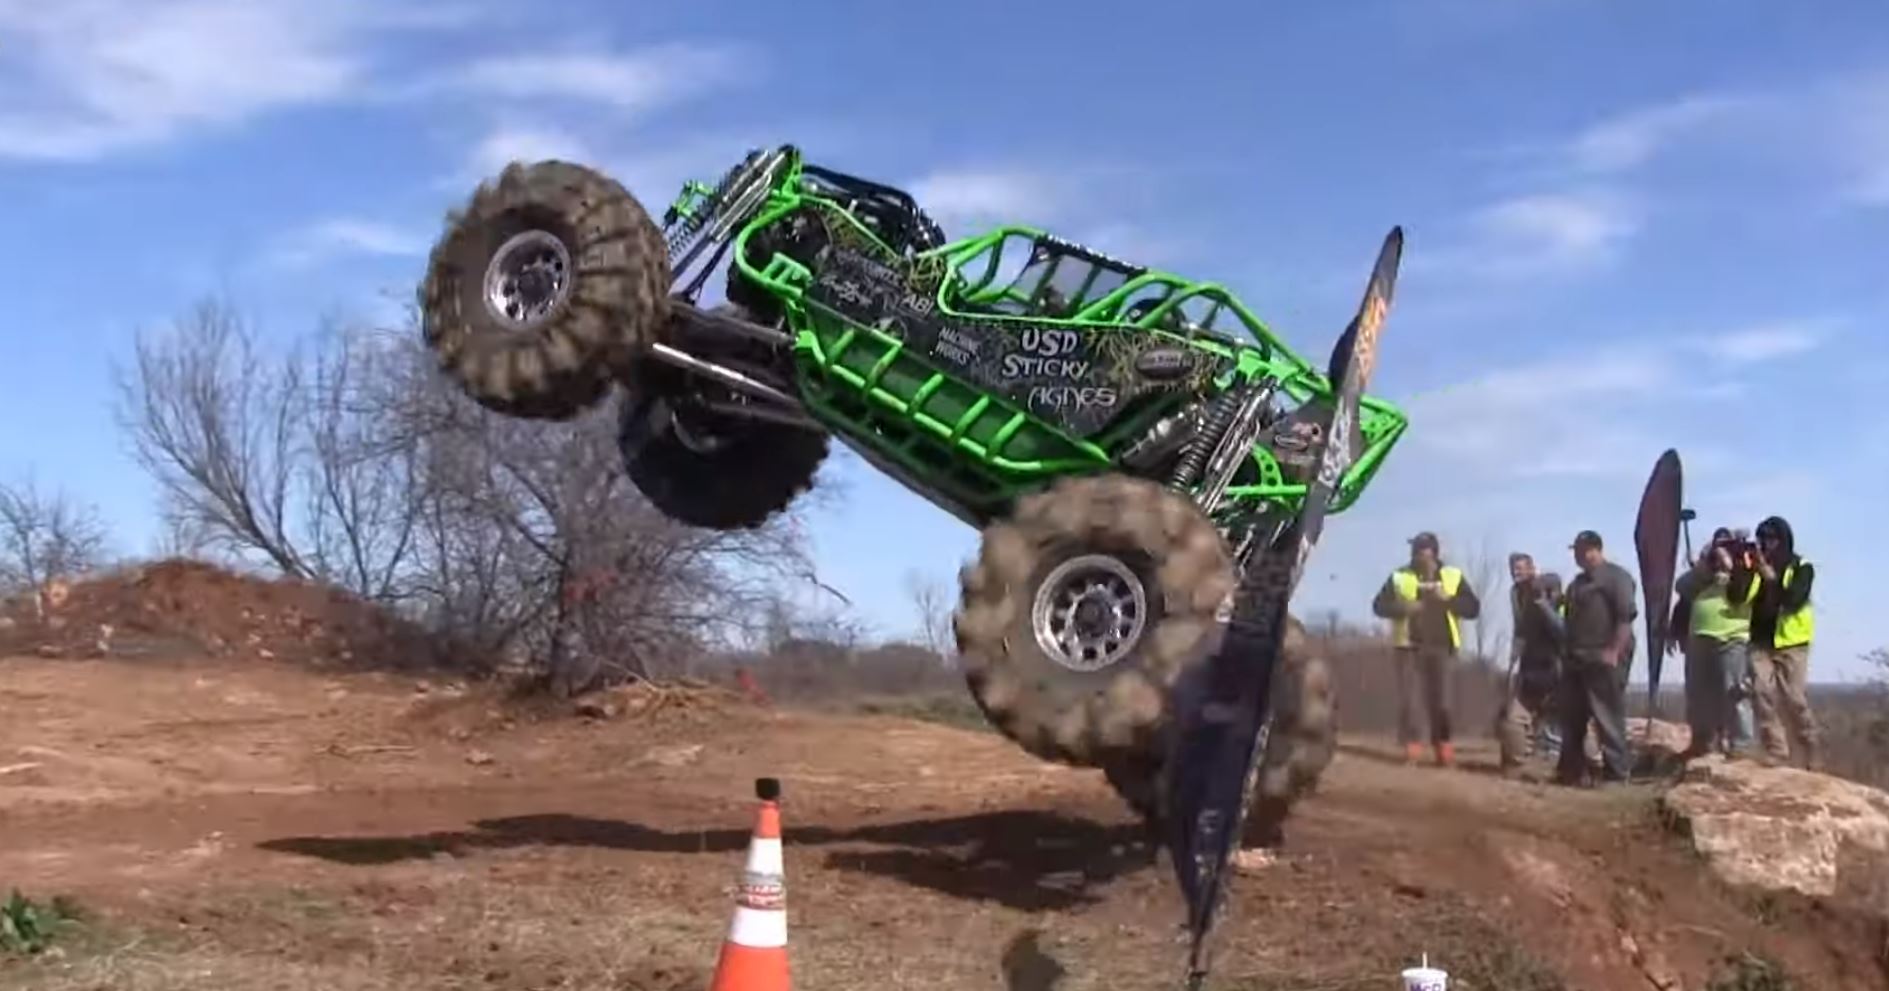 High Flying Rock Bouncers Take On The Dirt Hill Climb At